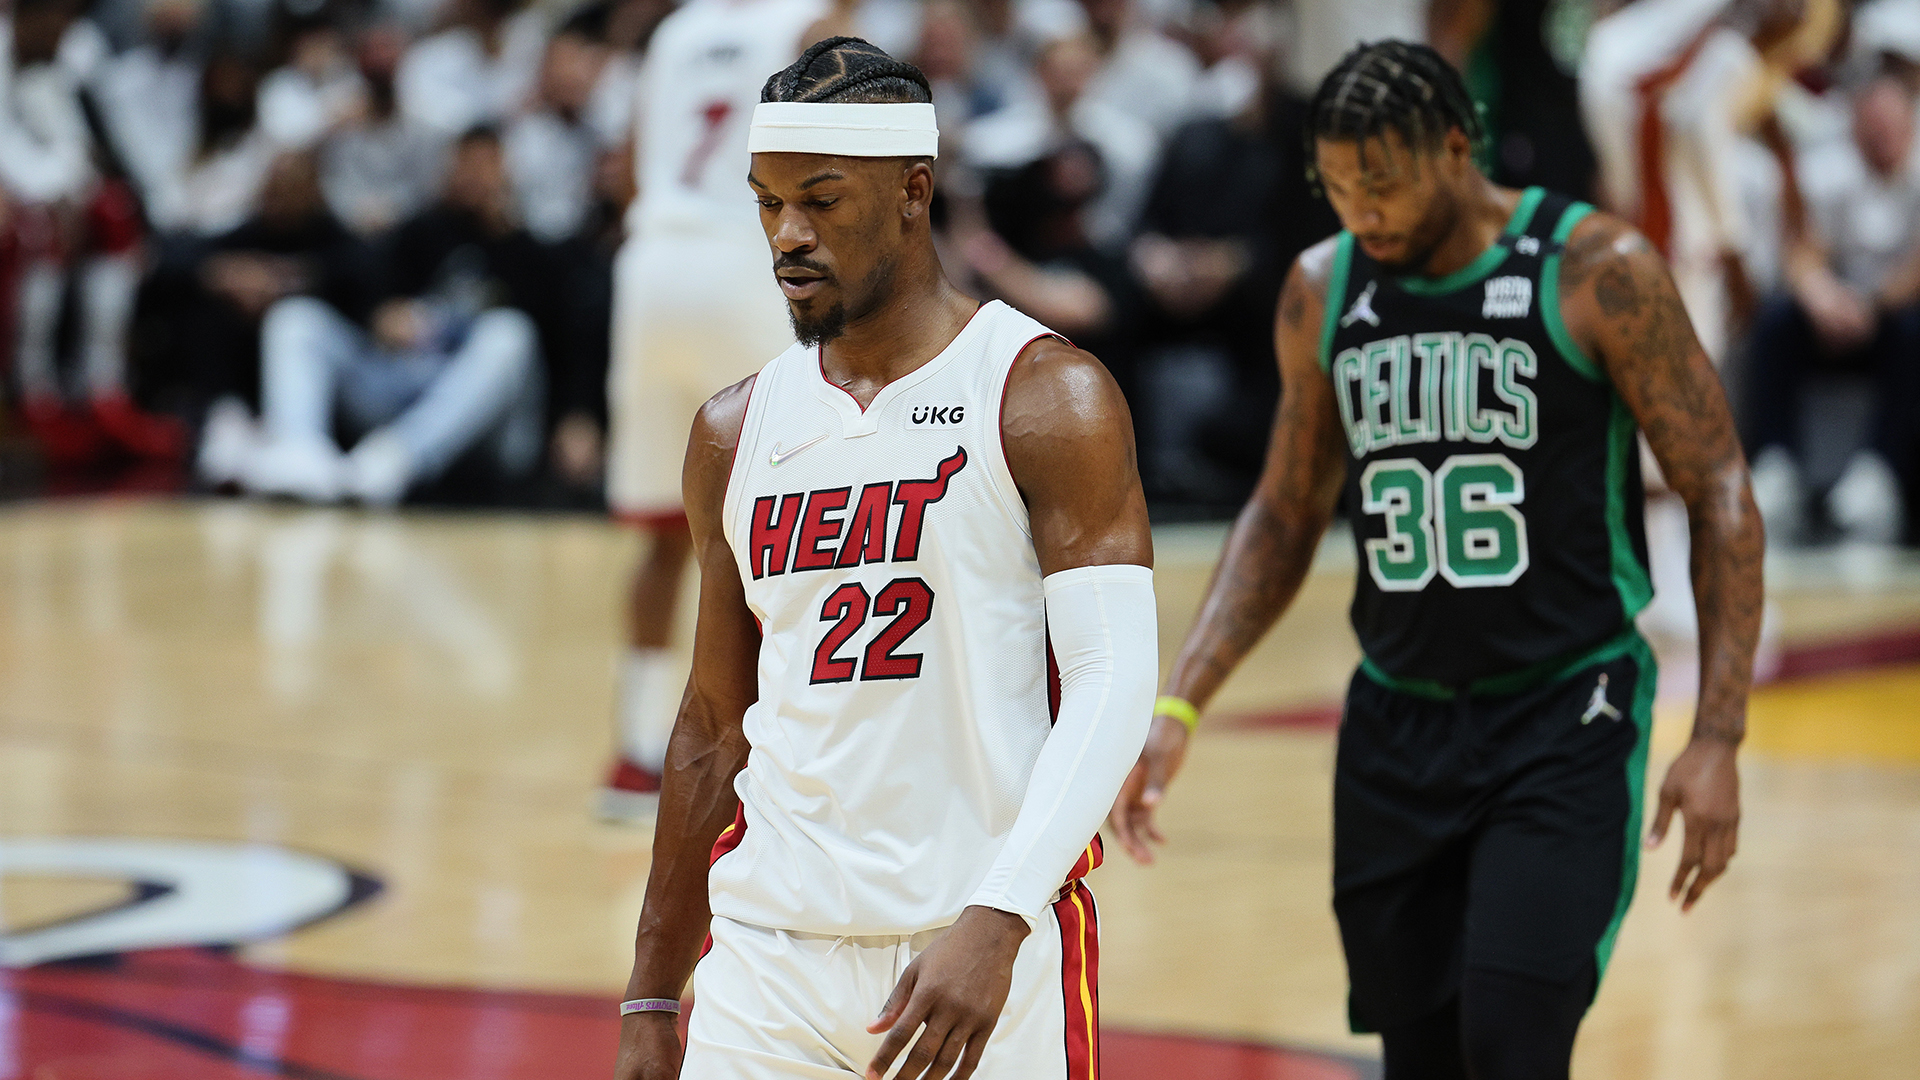 Jimmy Butler #22 of the Miami Heat looks on ahead of Marcus Smart #36 of the Boston Celtics during the first quarter in Game Five of the 2022 NBA Playoffs Eastern Conference Finals at FTX Arena on May 25, 2022 in Miami, Florida.